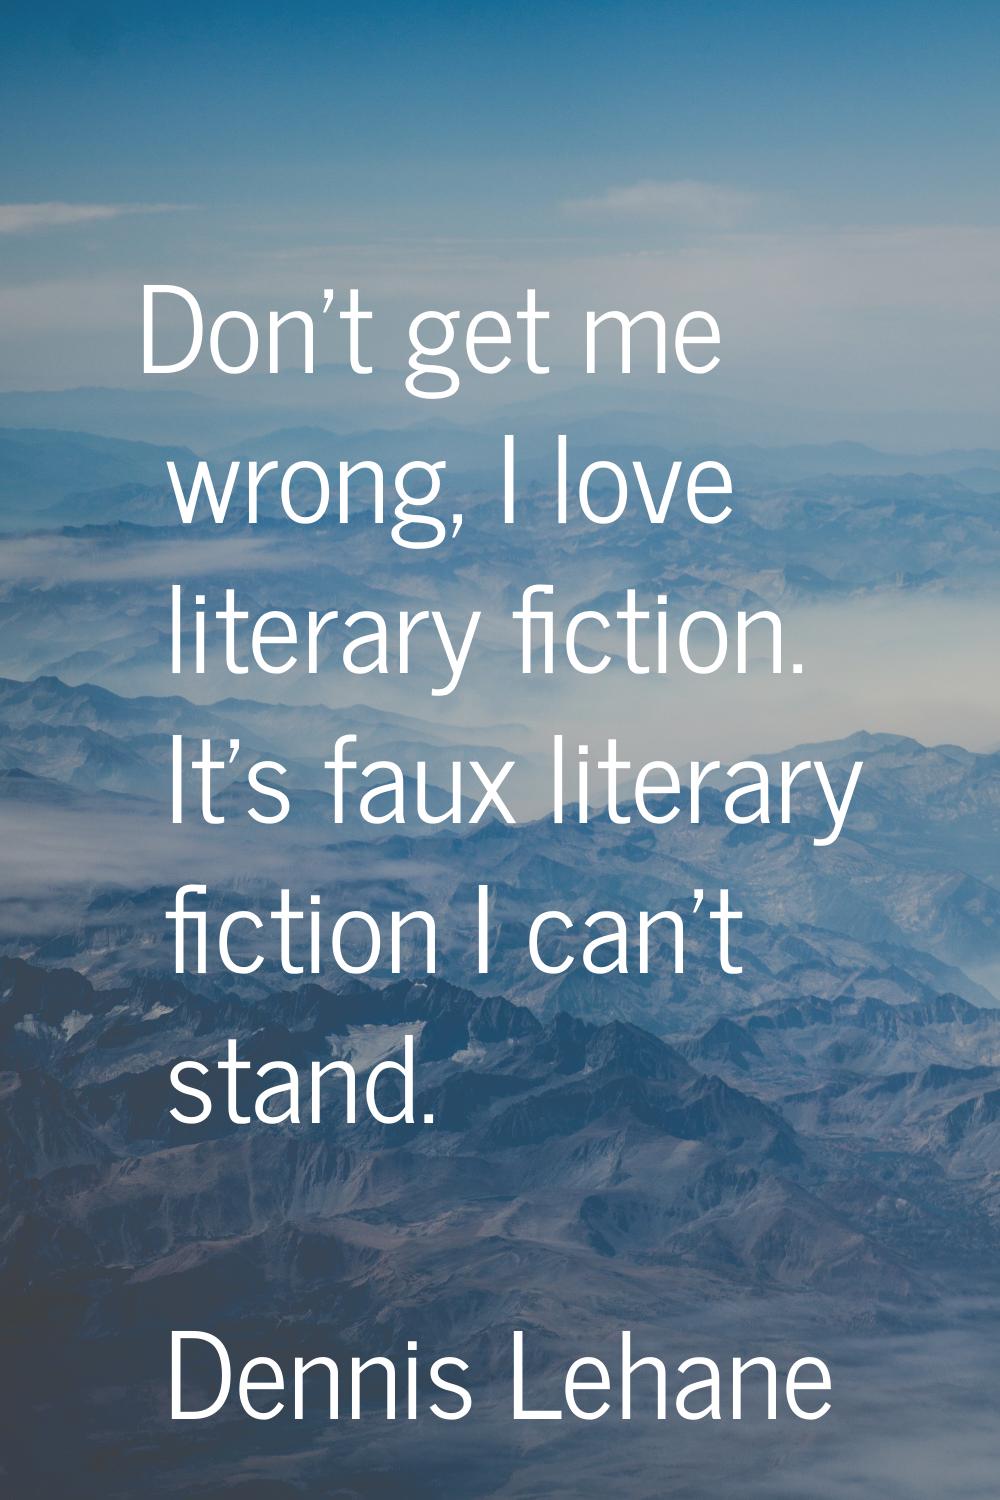 Don't get me wrong, I love literary fiction. It's faux literary fiction I can't stand.